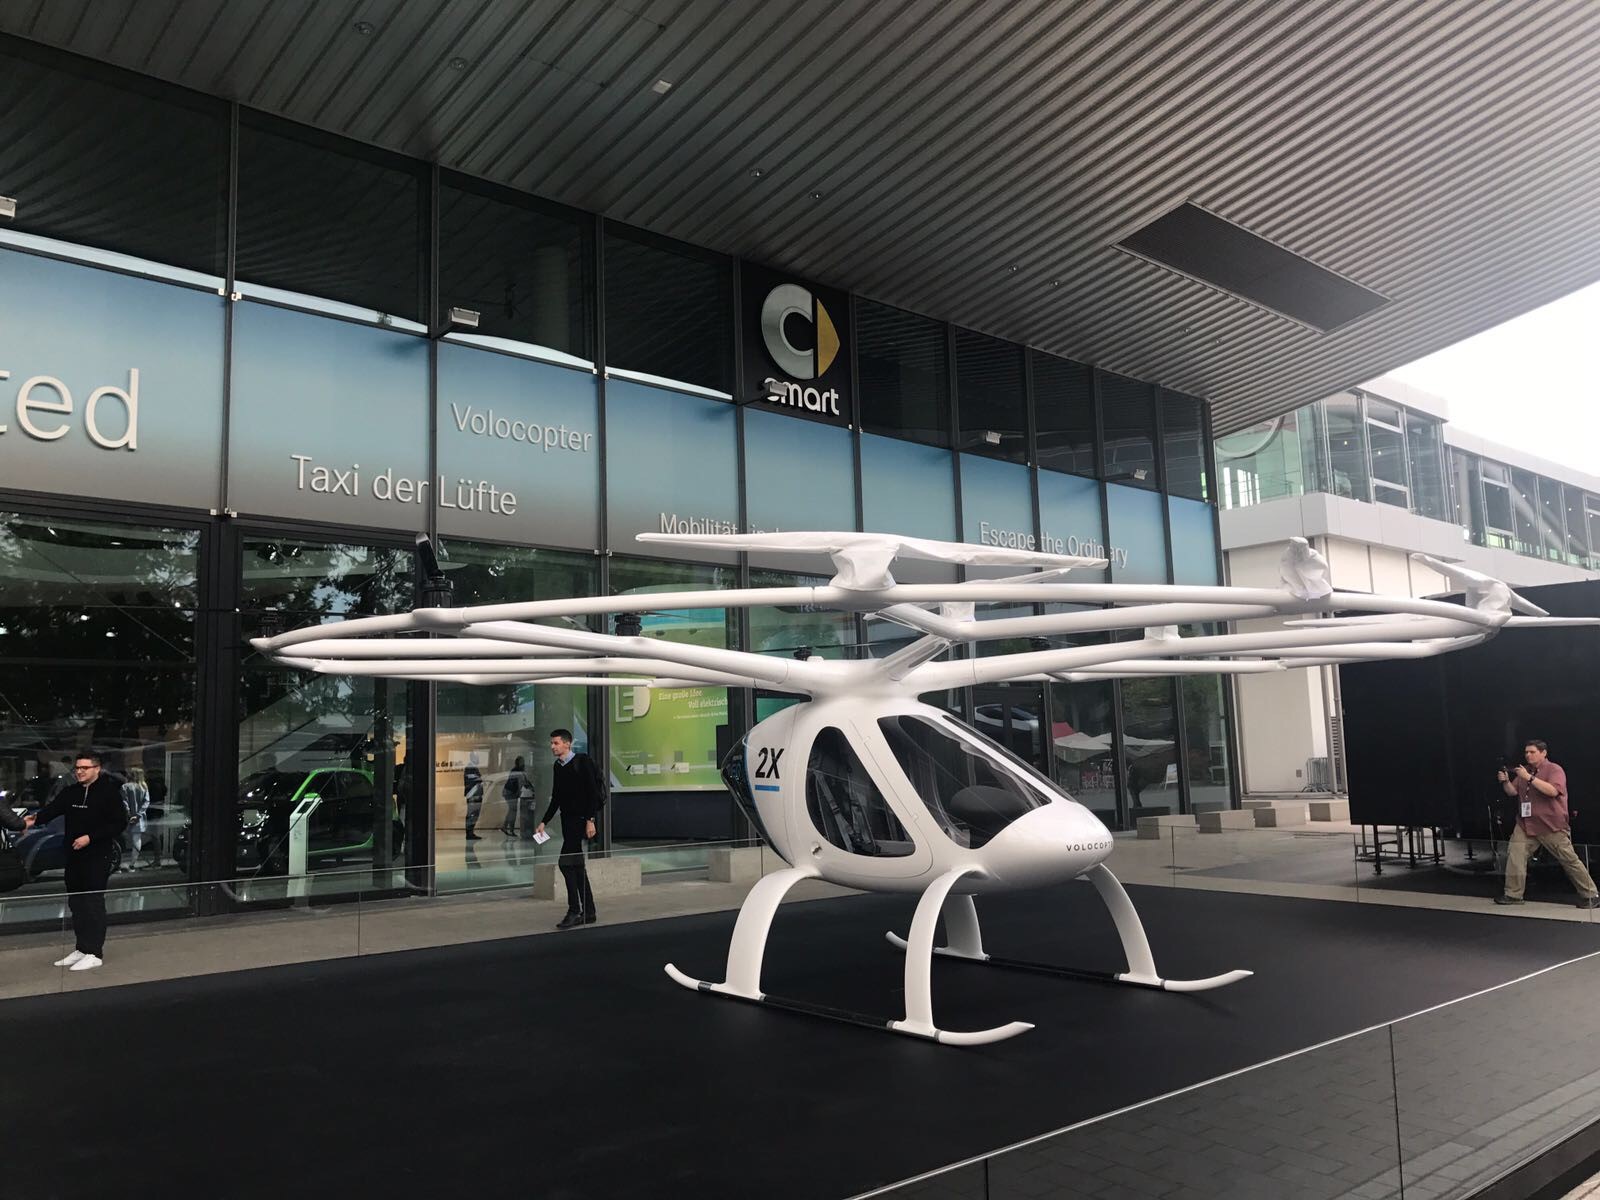 The Volocopter was on display in Frankfurt. Daimler has invested millions into the company and Dubai is reportedly interested in using them as flying taxis. 